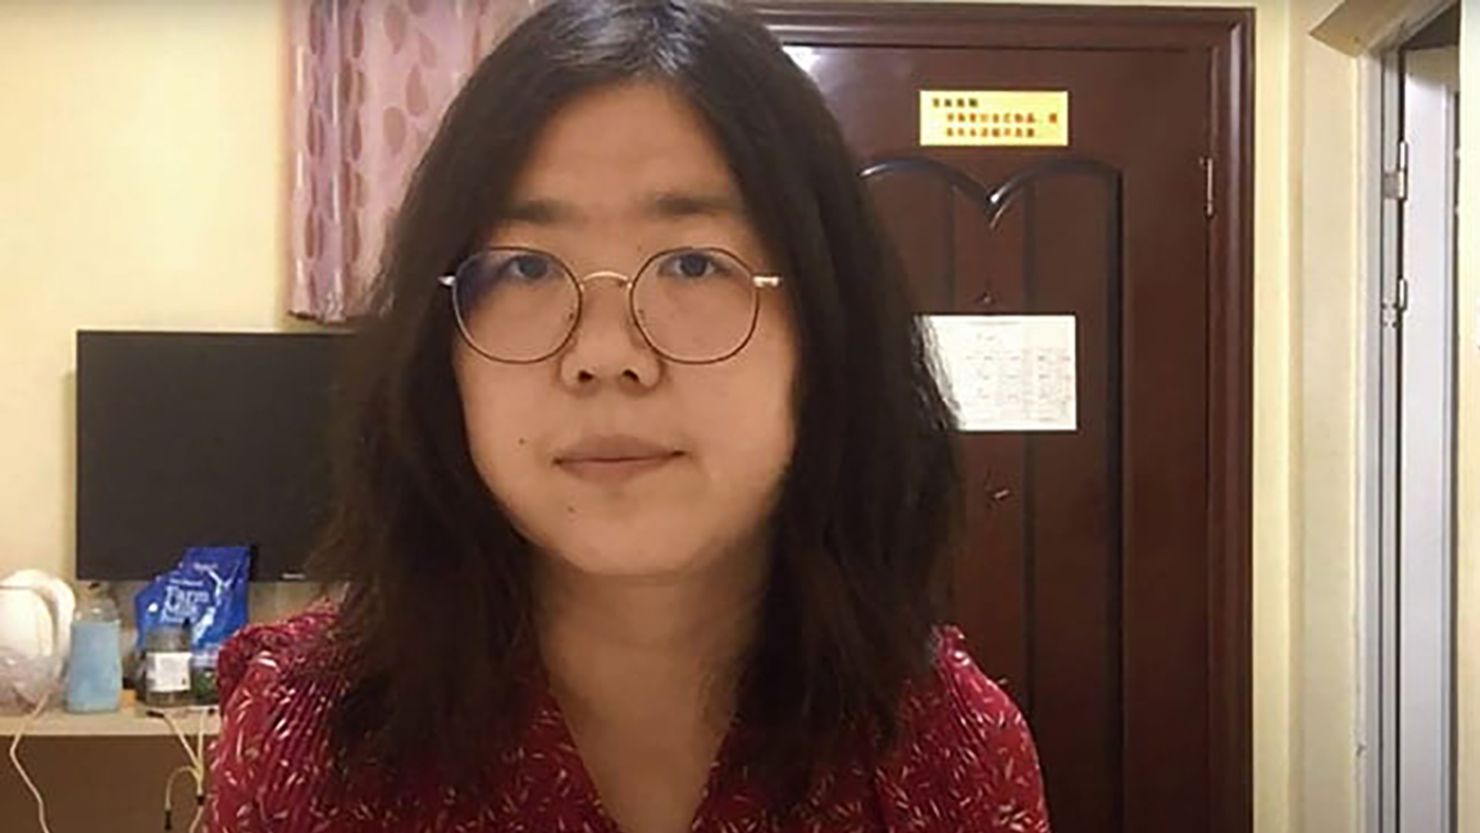 Chinese citizen journalist Zhang Zhan was sentenced to four years in prison for reporting on the initial Covid-19 outbreak in Wuhan.